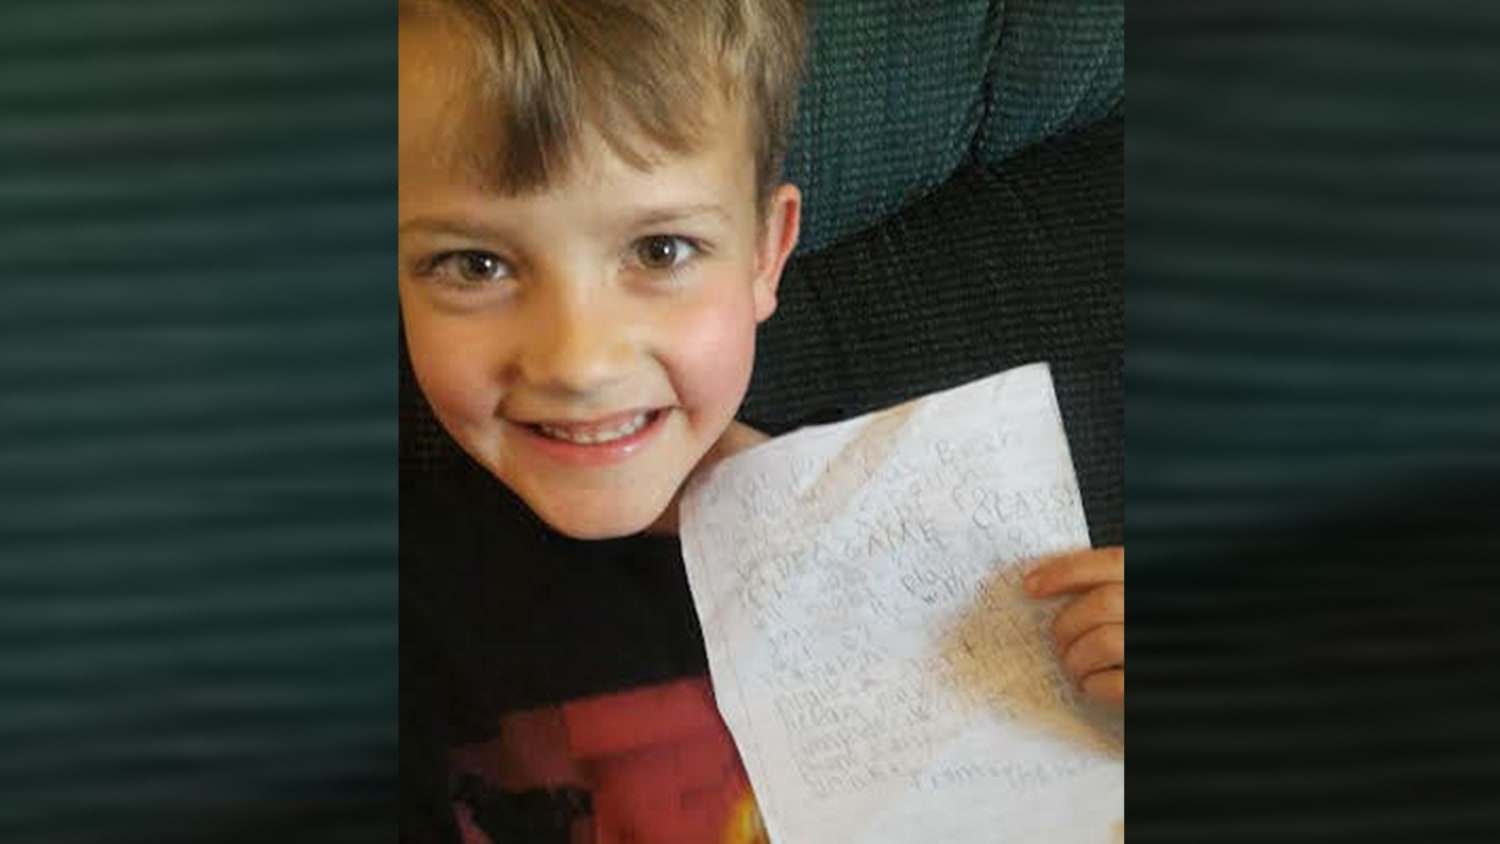 Boy fakes note from school to play more video games